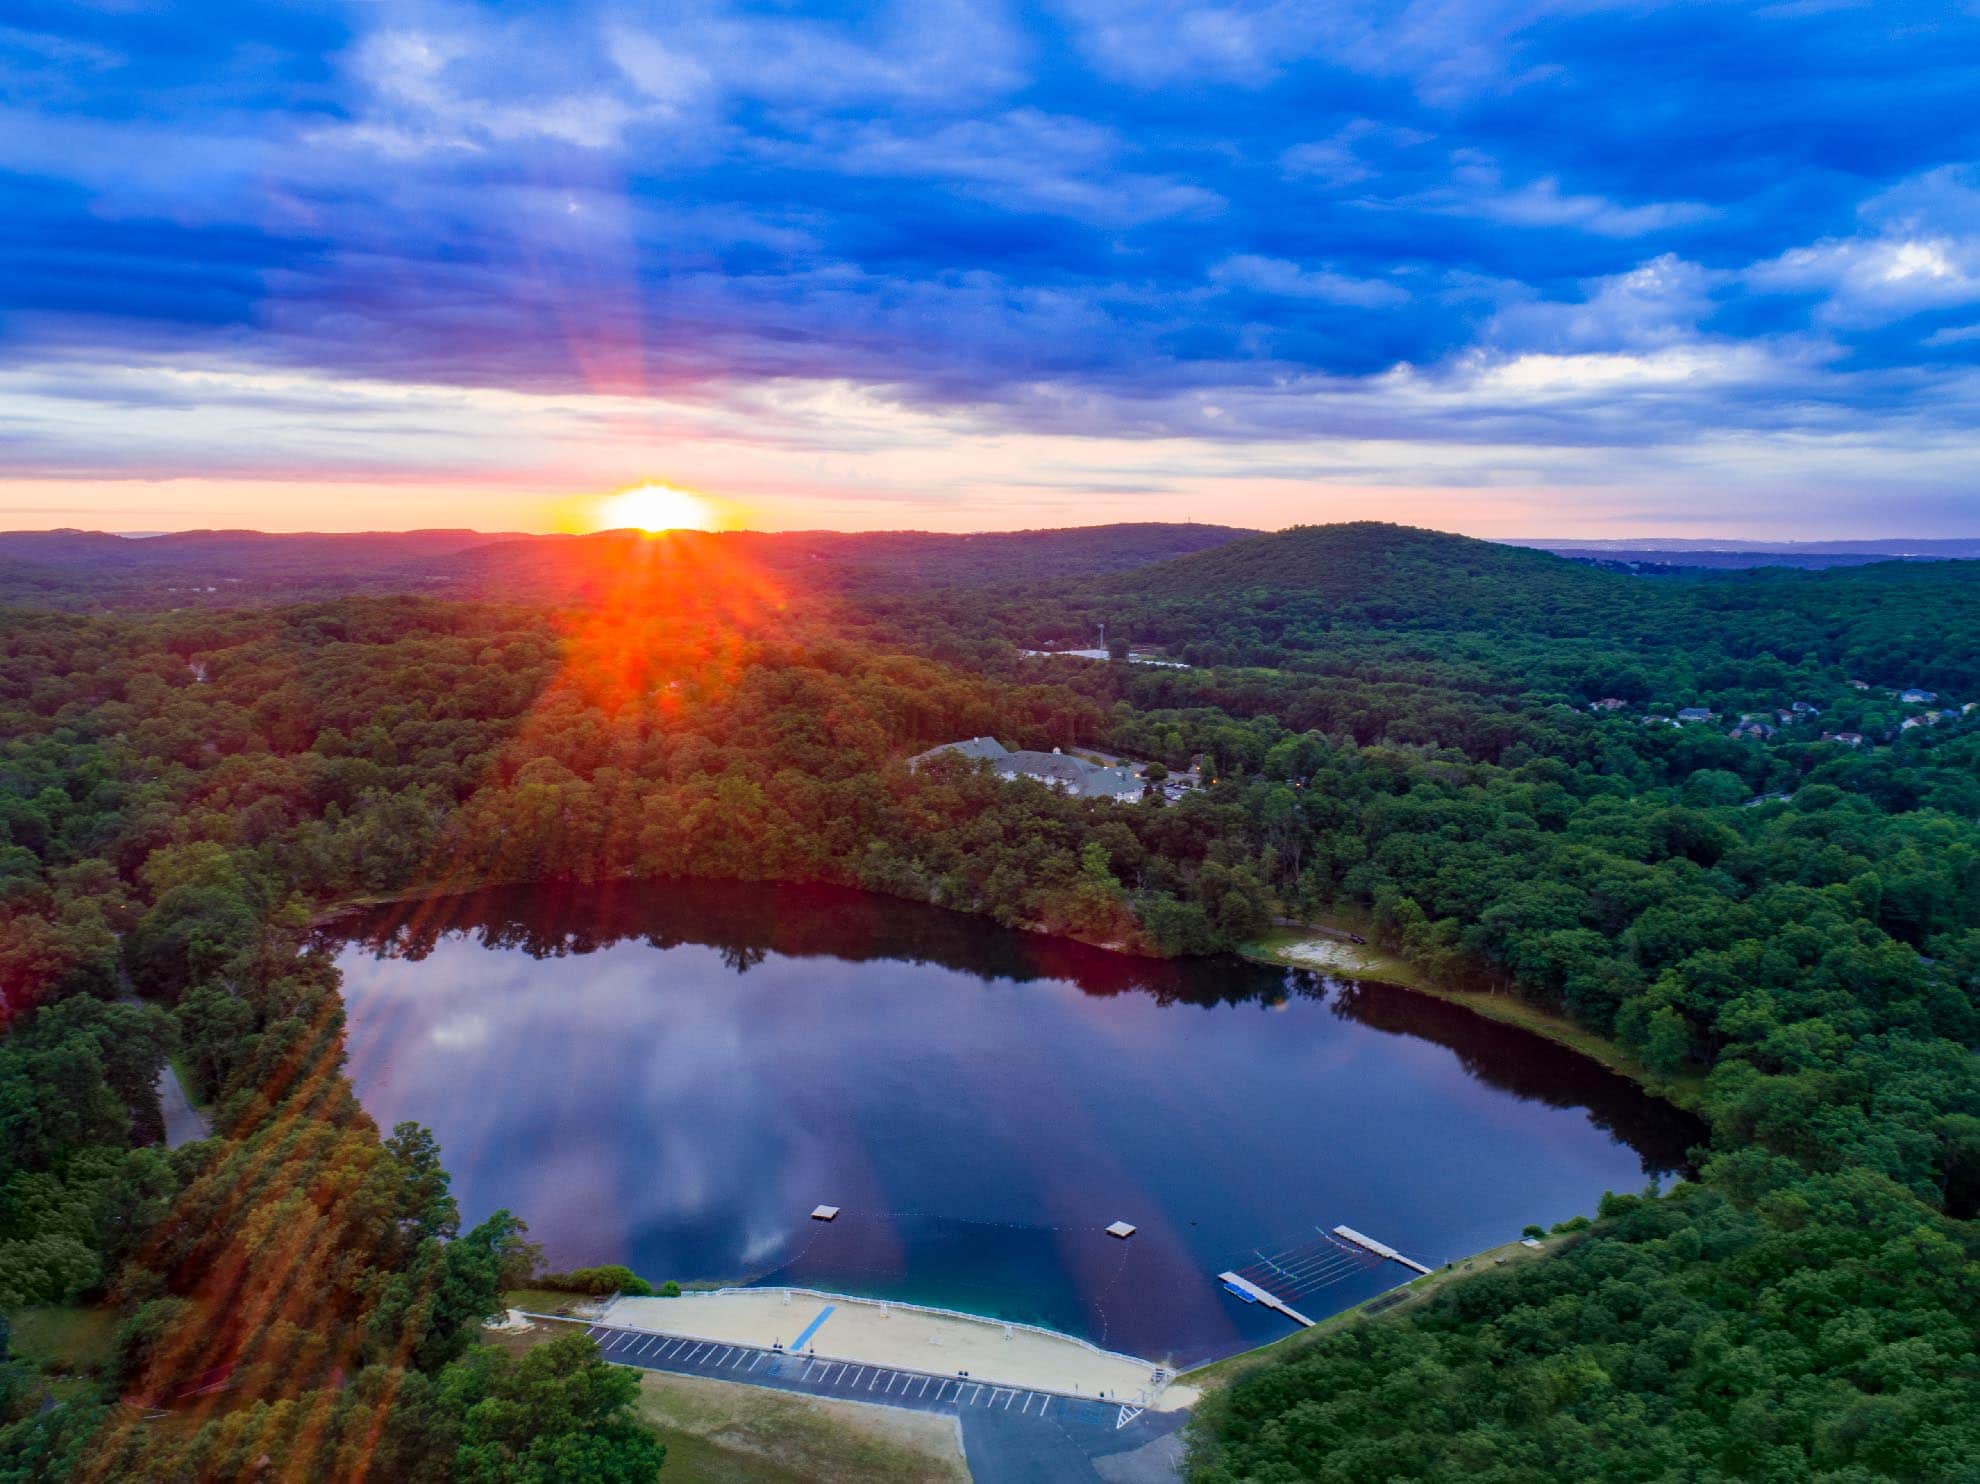 Photograph of sunrise over Cooks Pond Denville NJ taken with a drone